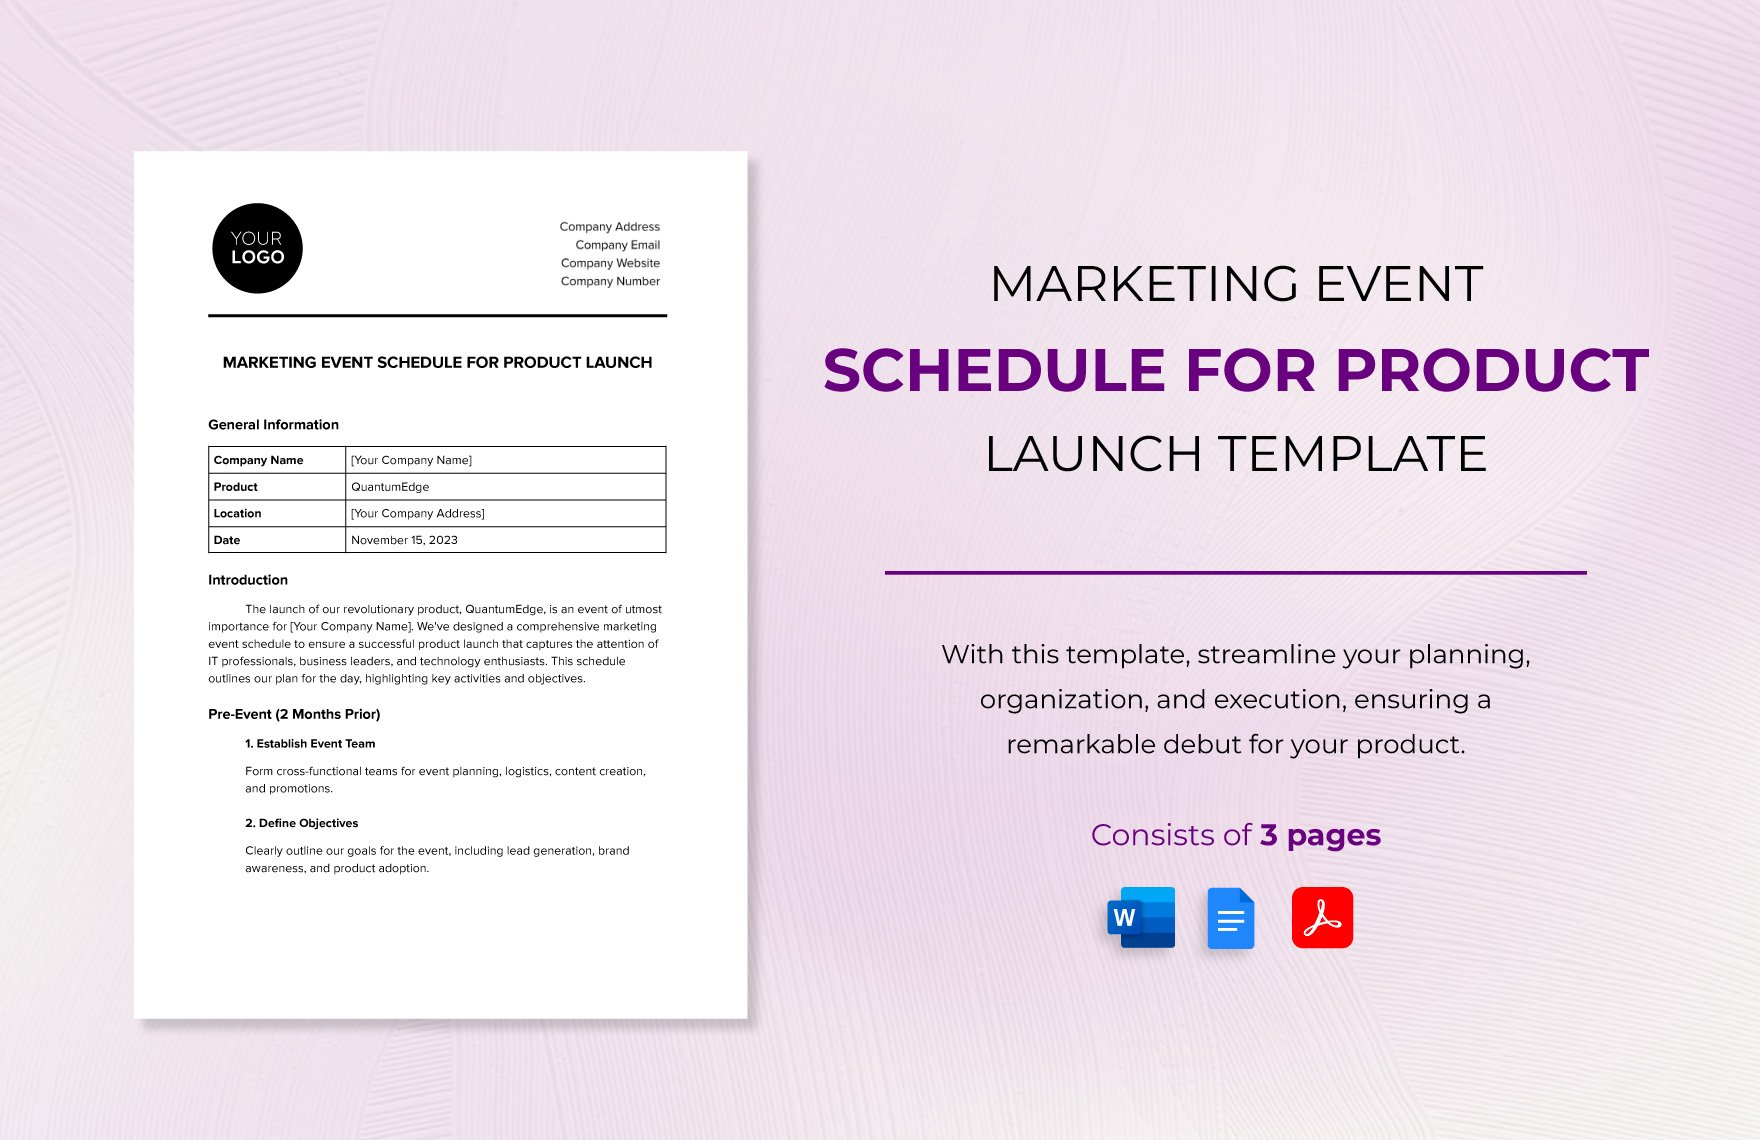 Marketing Event Schedule for Product Launch Template in Word, Google Docs, PDF